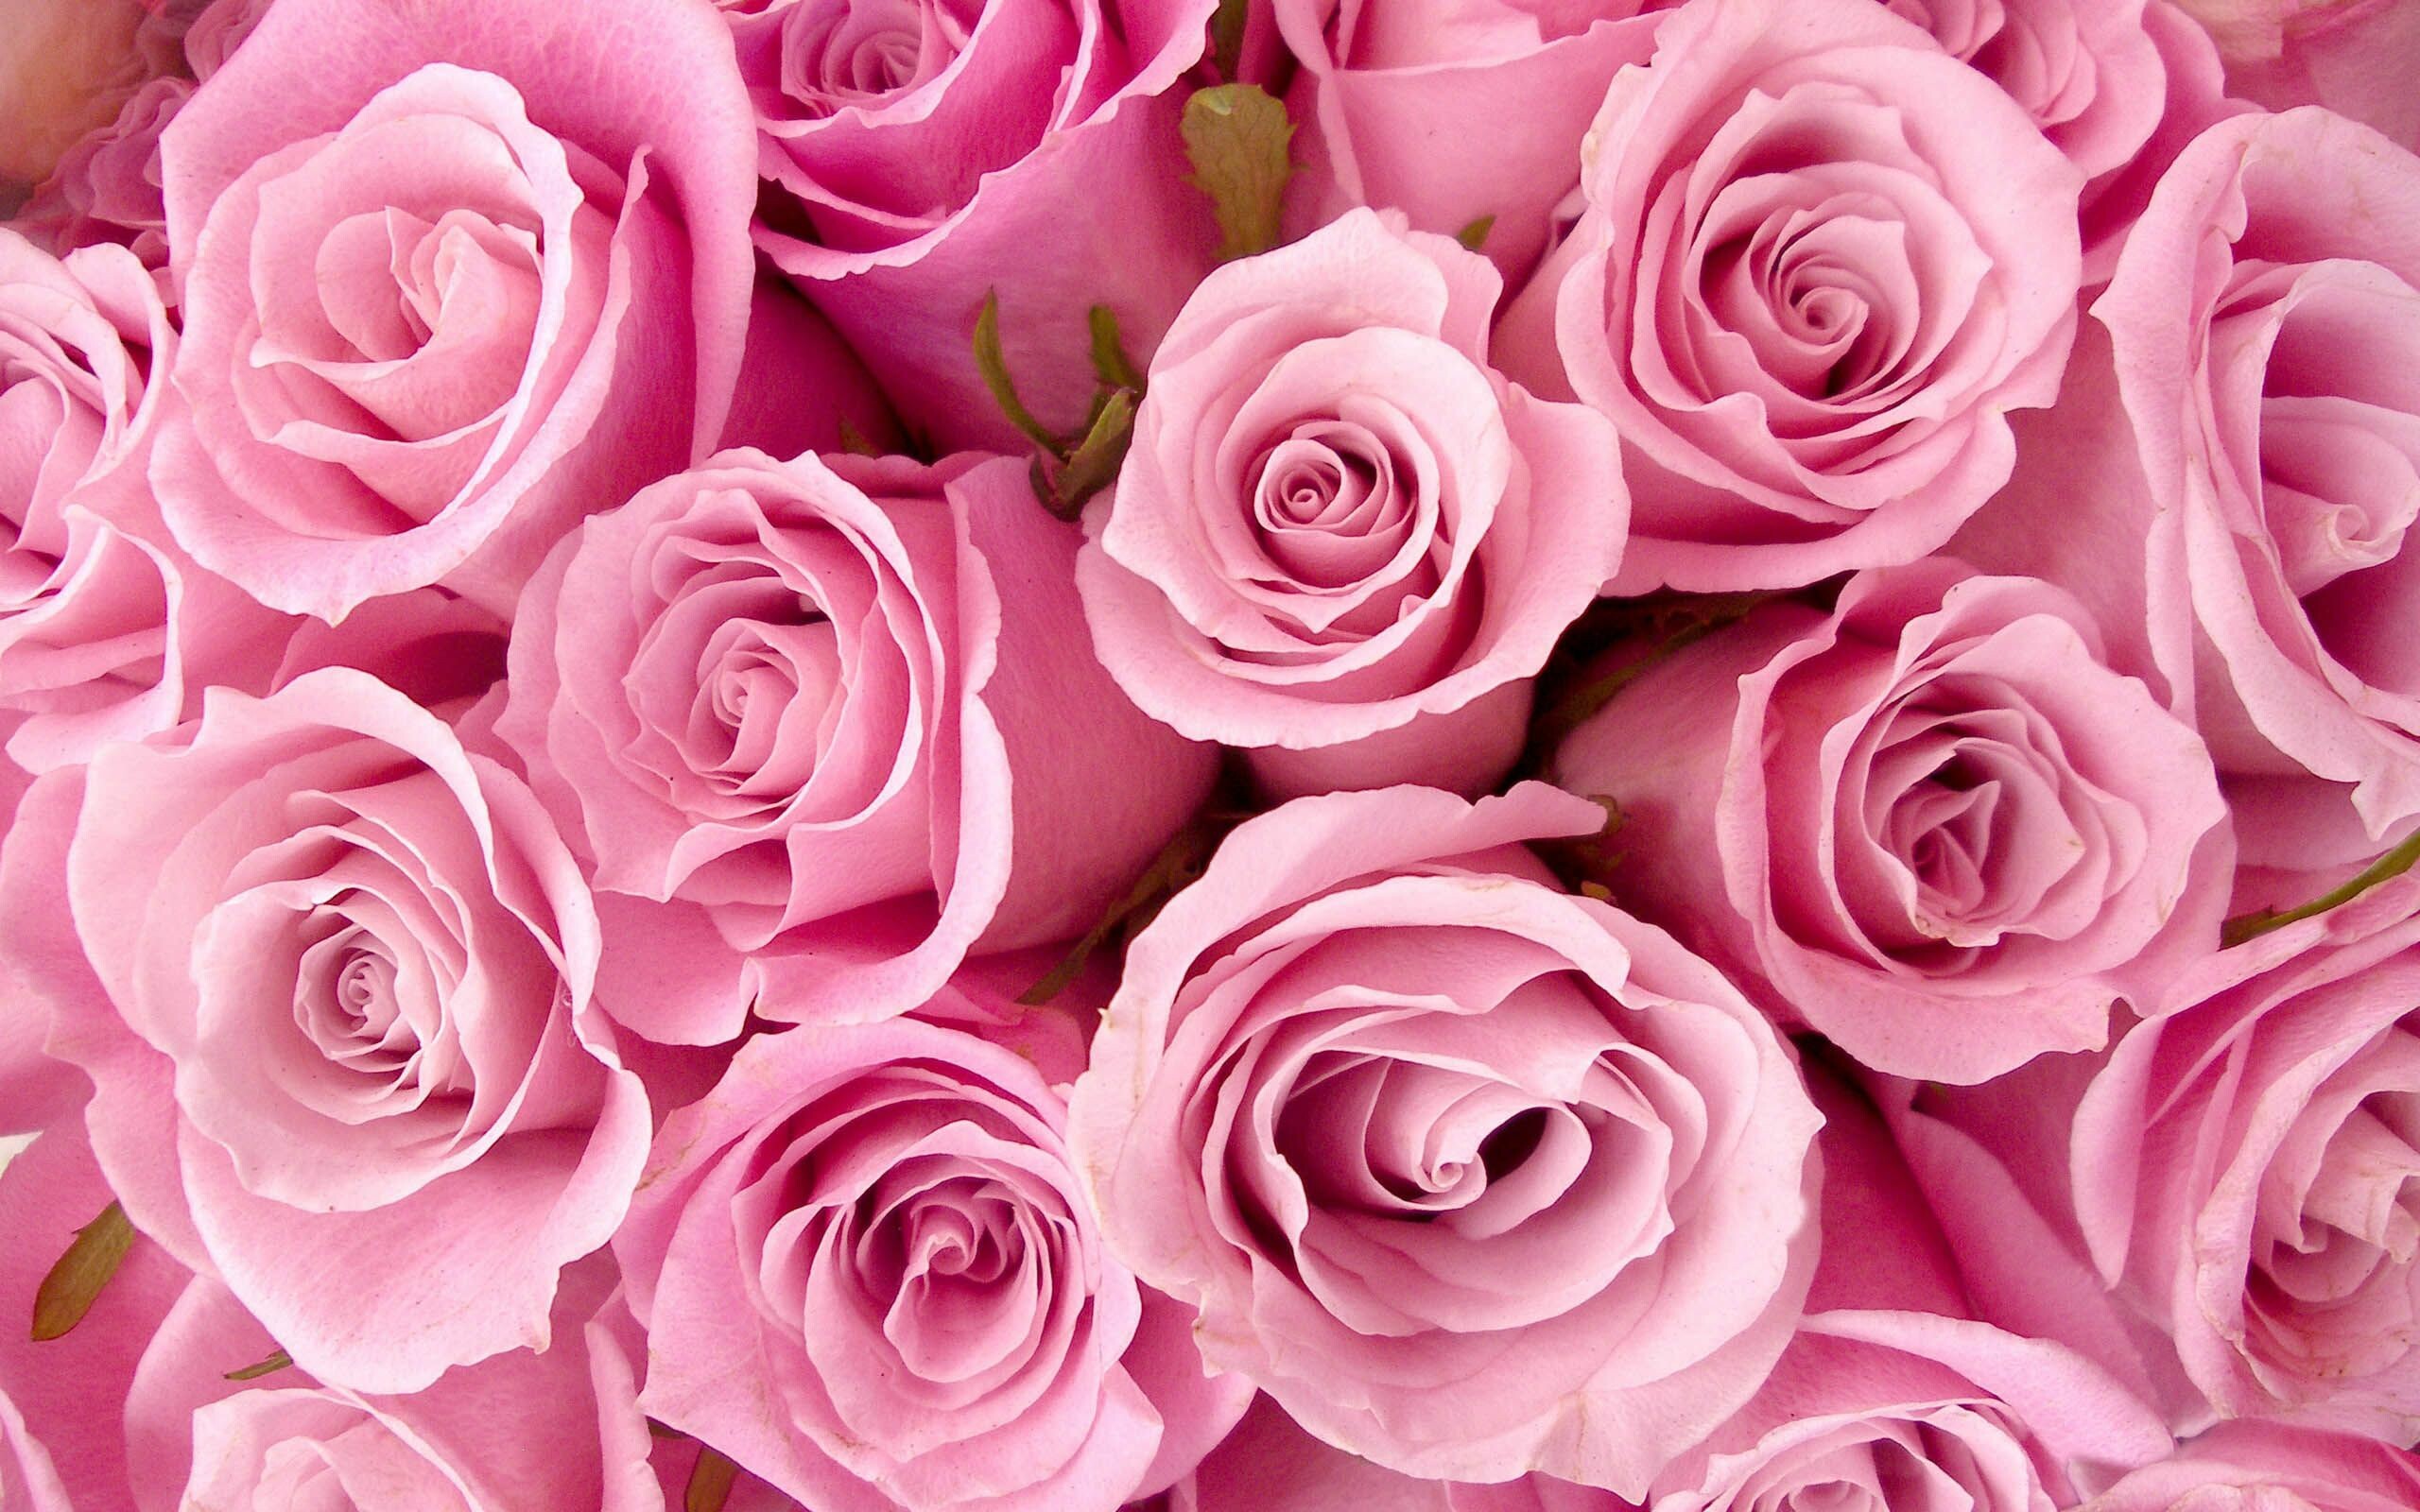 72+ Rose Wallpapers: HD, 4K, 5K for PC and Mobile | Download free images  for iPhone, Android